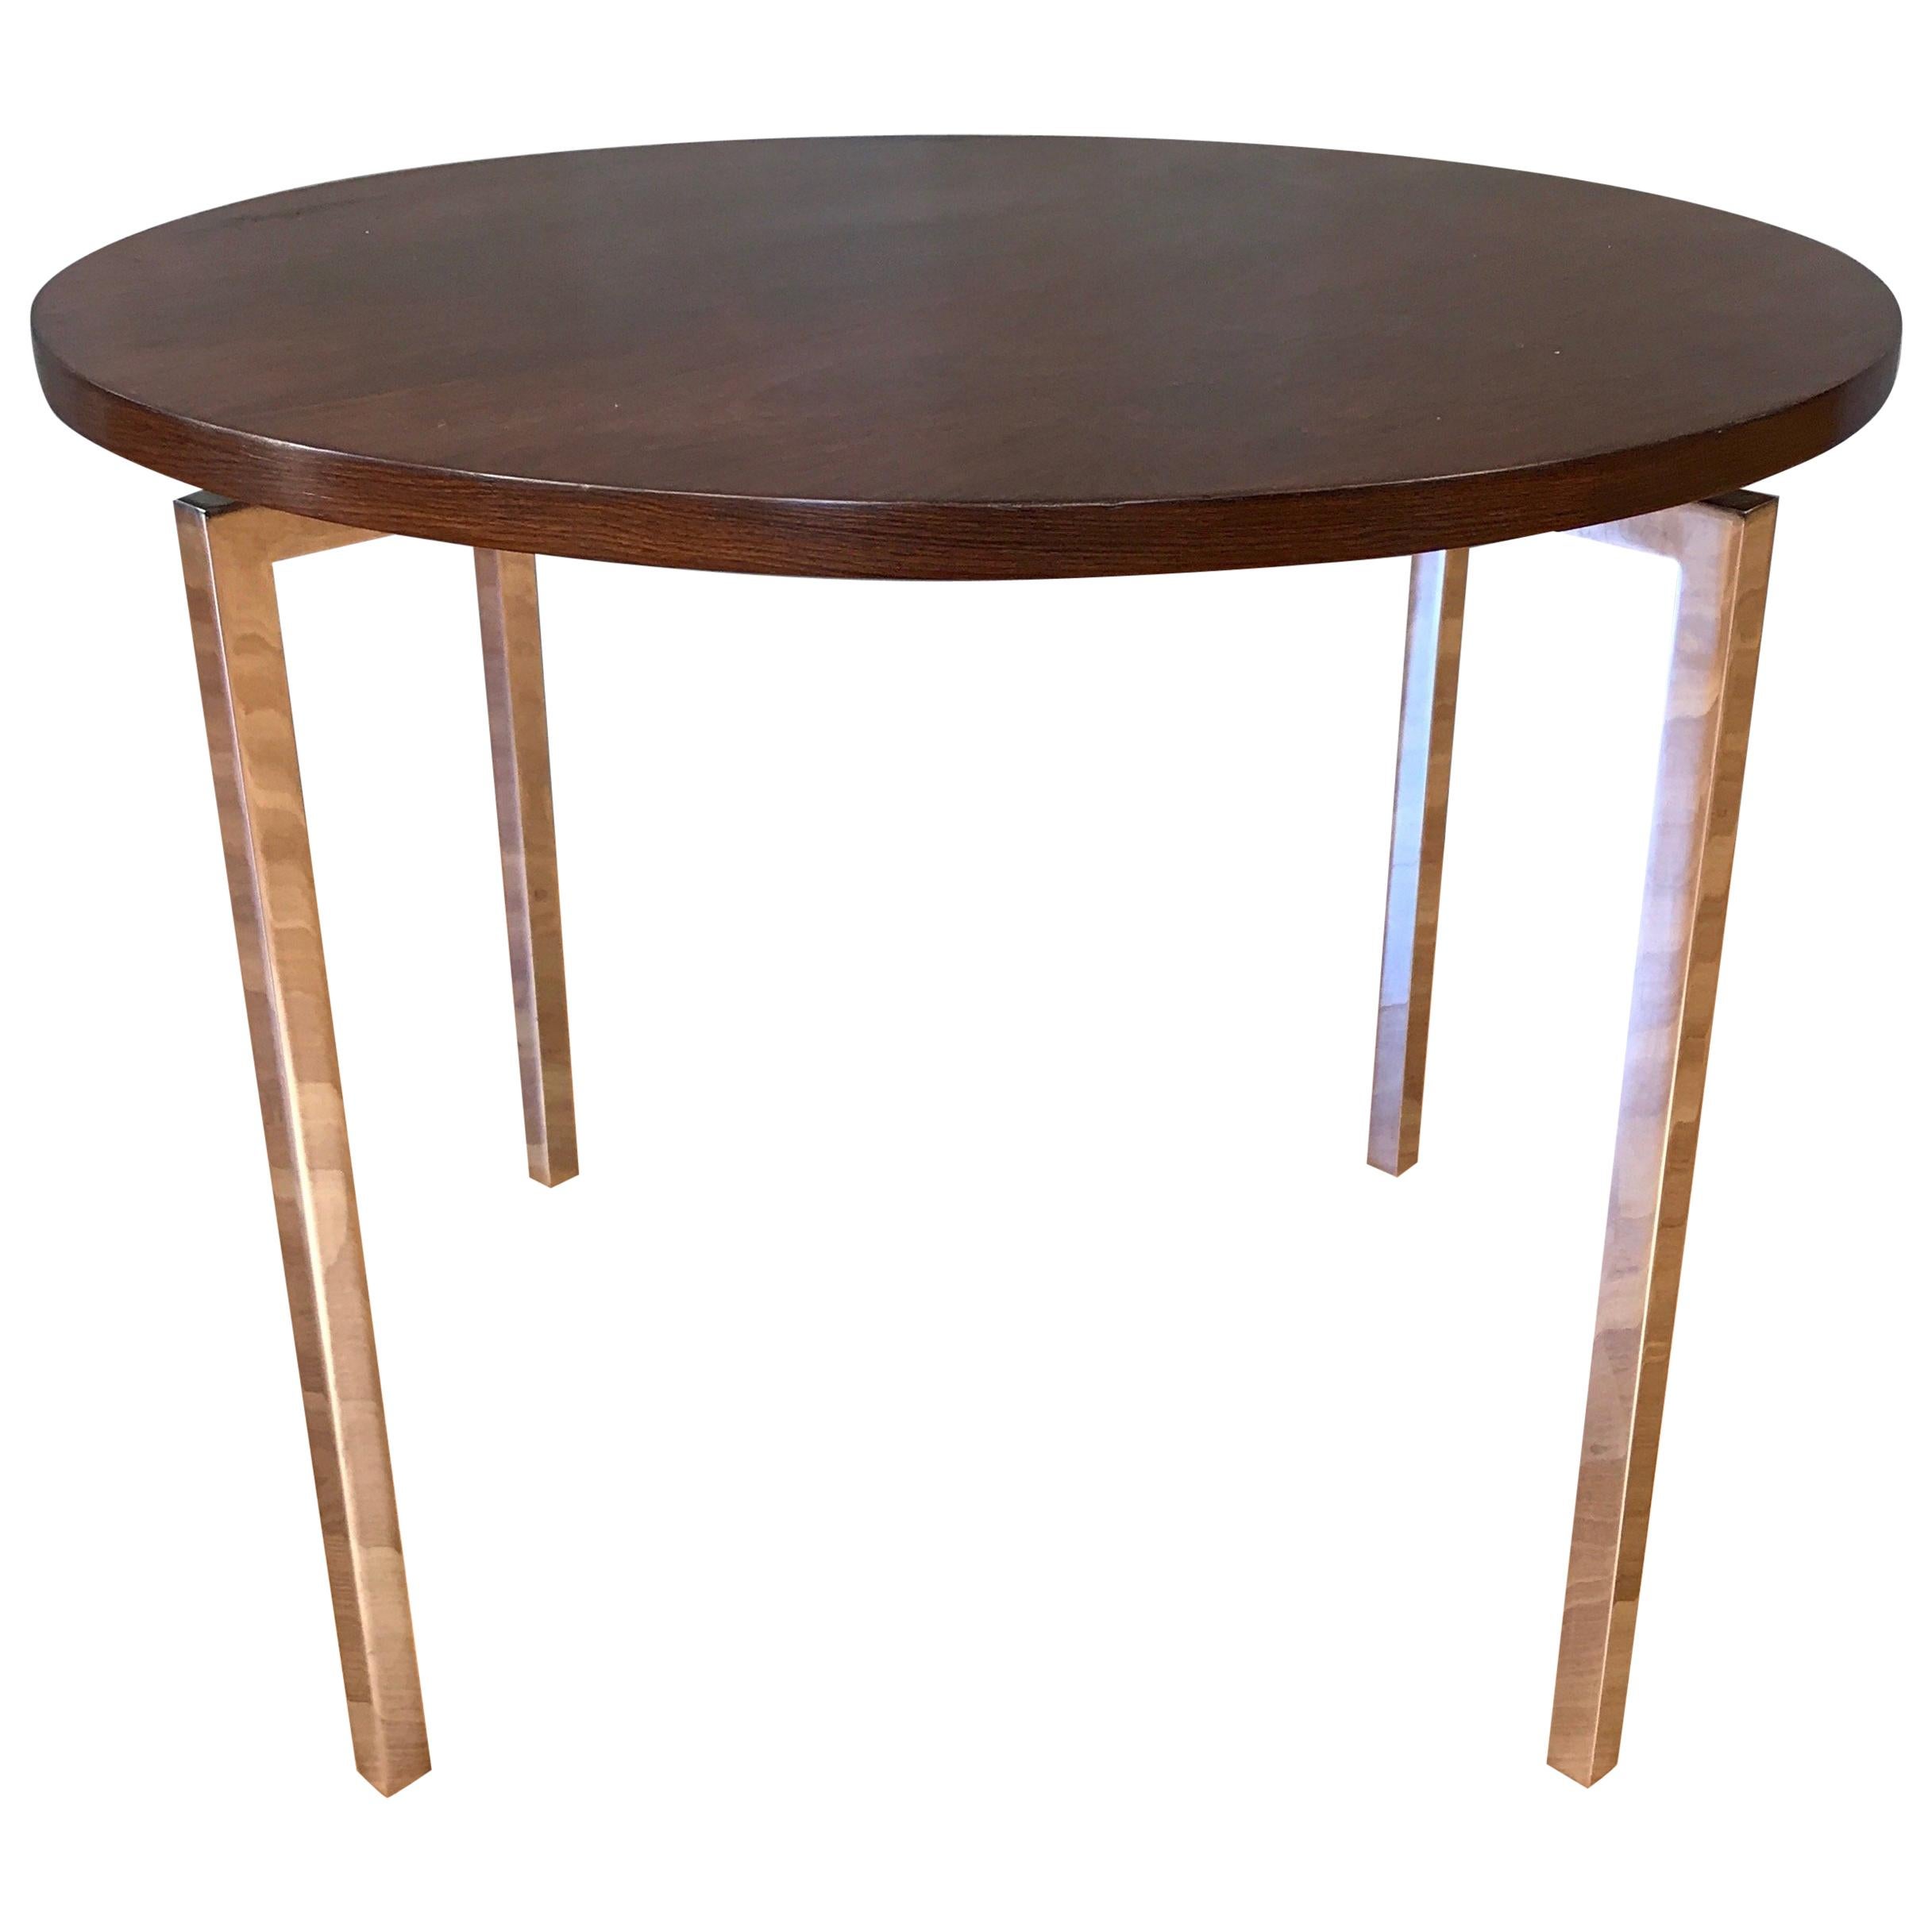 Florence Knoll for Knoll Associates Rosewood & Polished Nickel Round Side Table